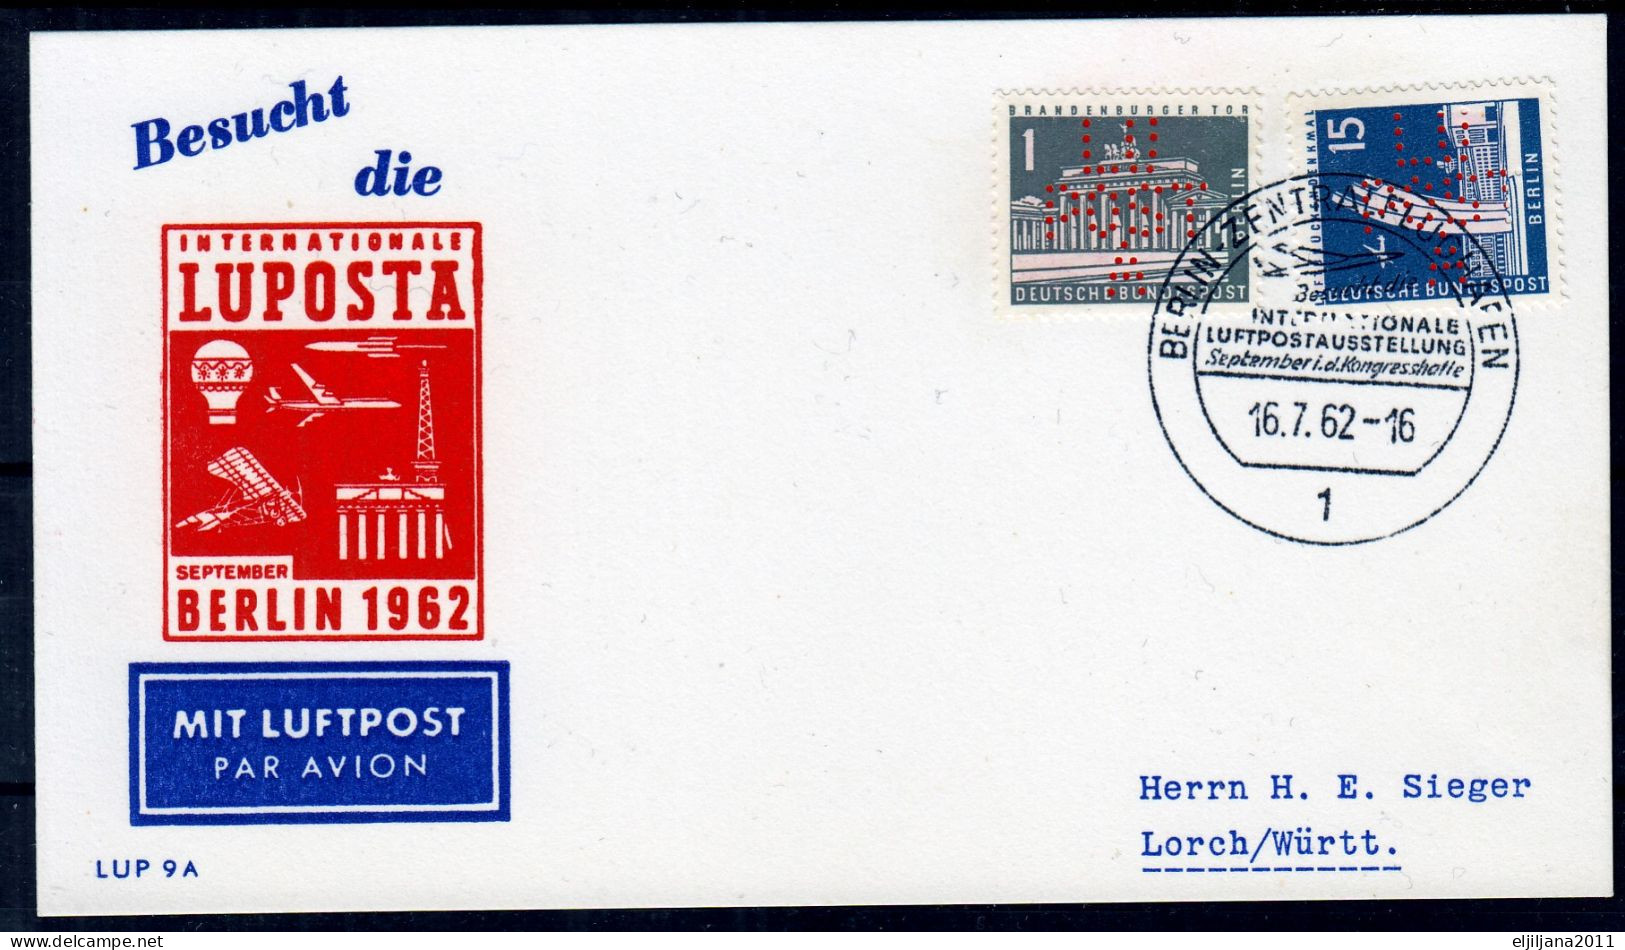 Action !! SALE !! 50 % OFF !! ⁕ Germany BERLIN 1962 ⁕ LUPOSTA Exhibition Airmail Mi.140, 145, 147 ⁕ 2v Postcard - Correo Aéreo